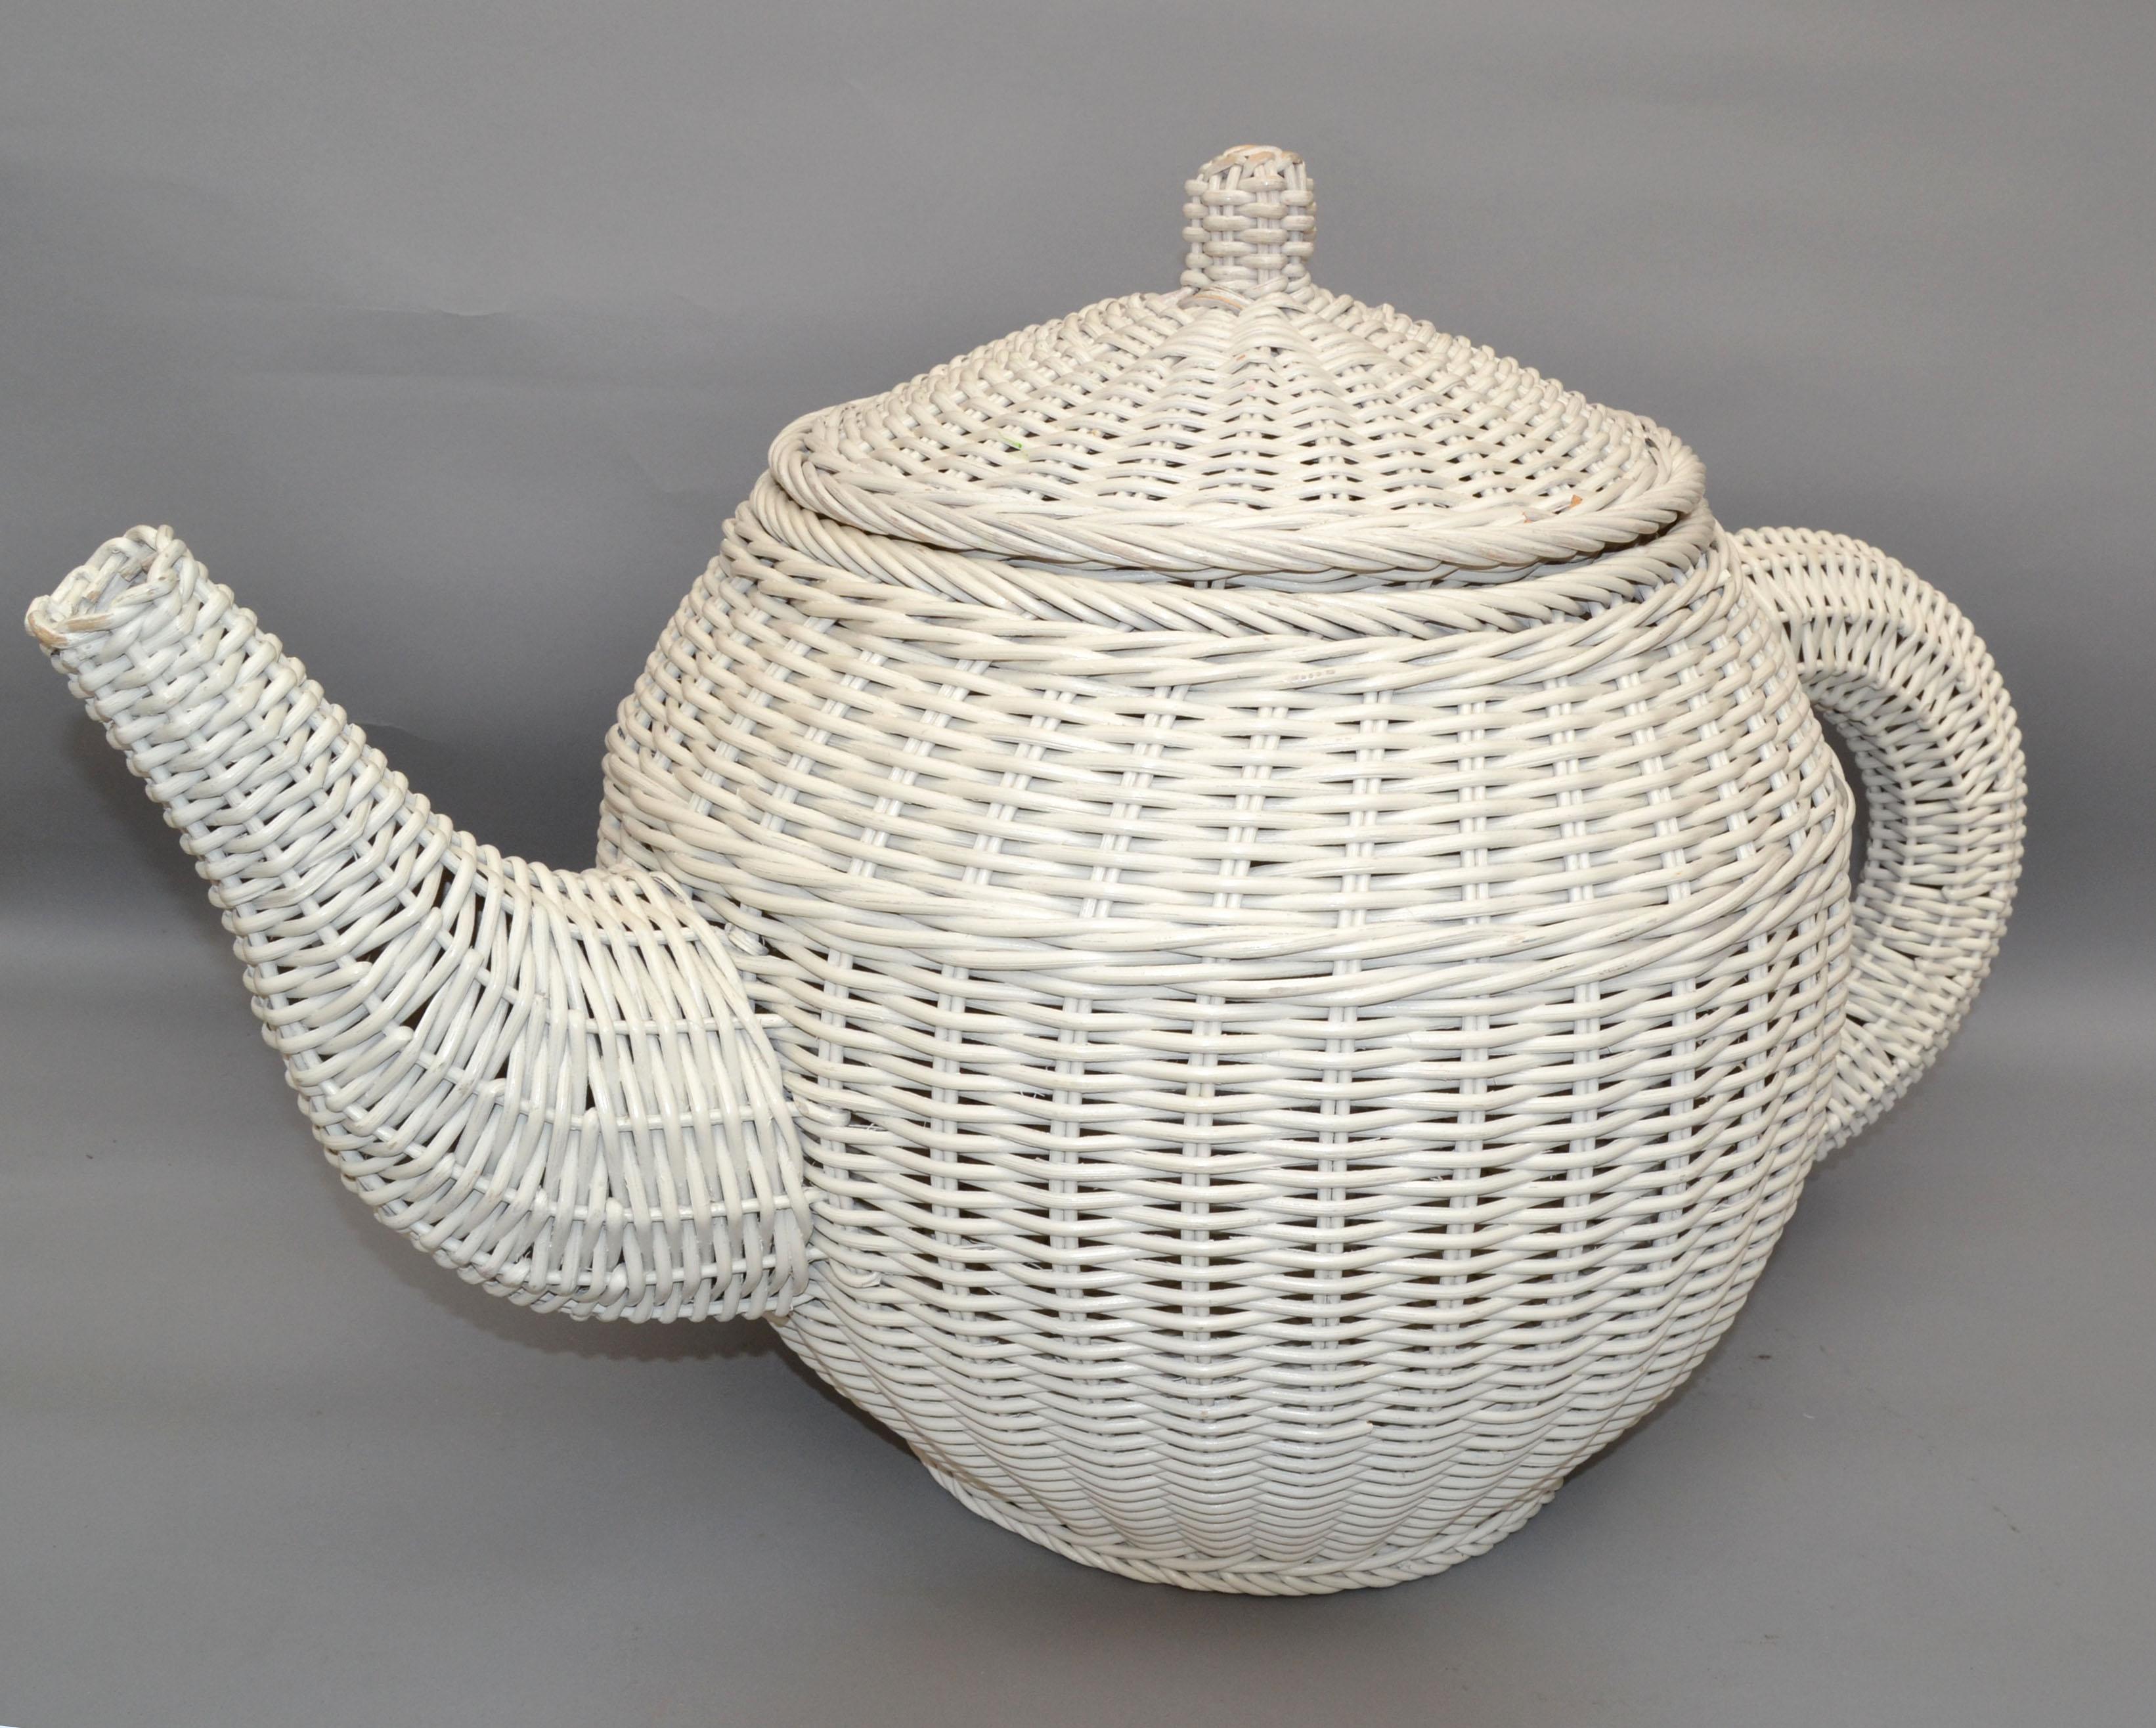 Mid-Century Modern handmade & hand woven white finished wicker, rattan & cane sculpted coffee or tea pot with lid.
Great as toy storage container or for a coffee sShop display.
All original condition with some minor breaks around the Lid knob to